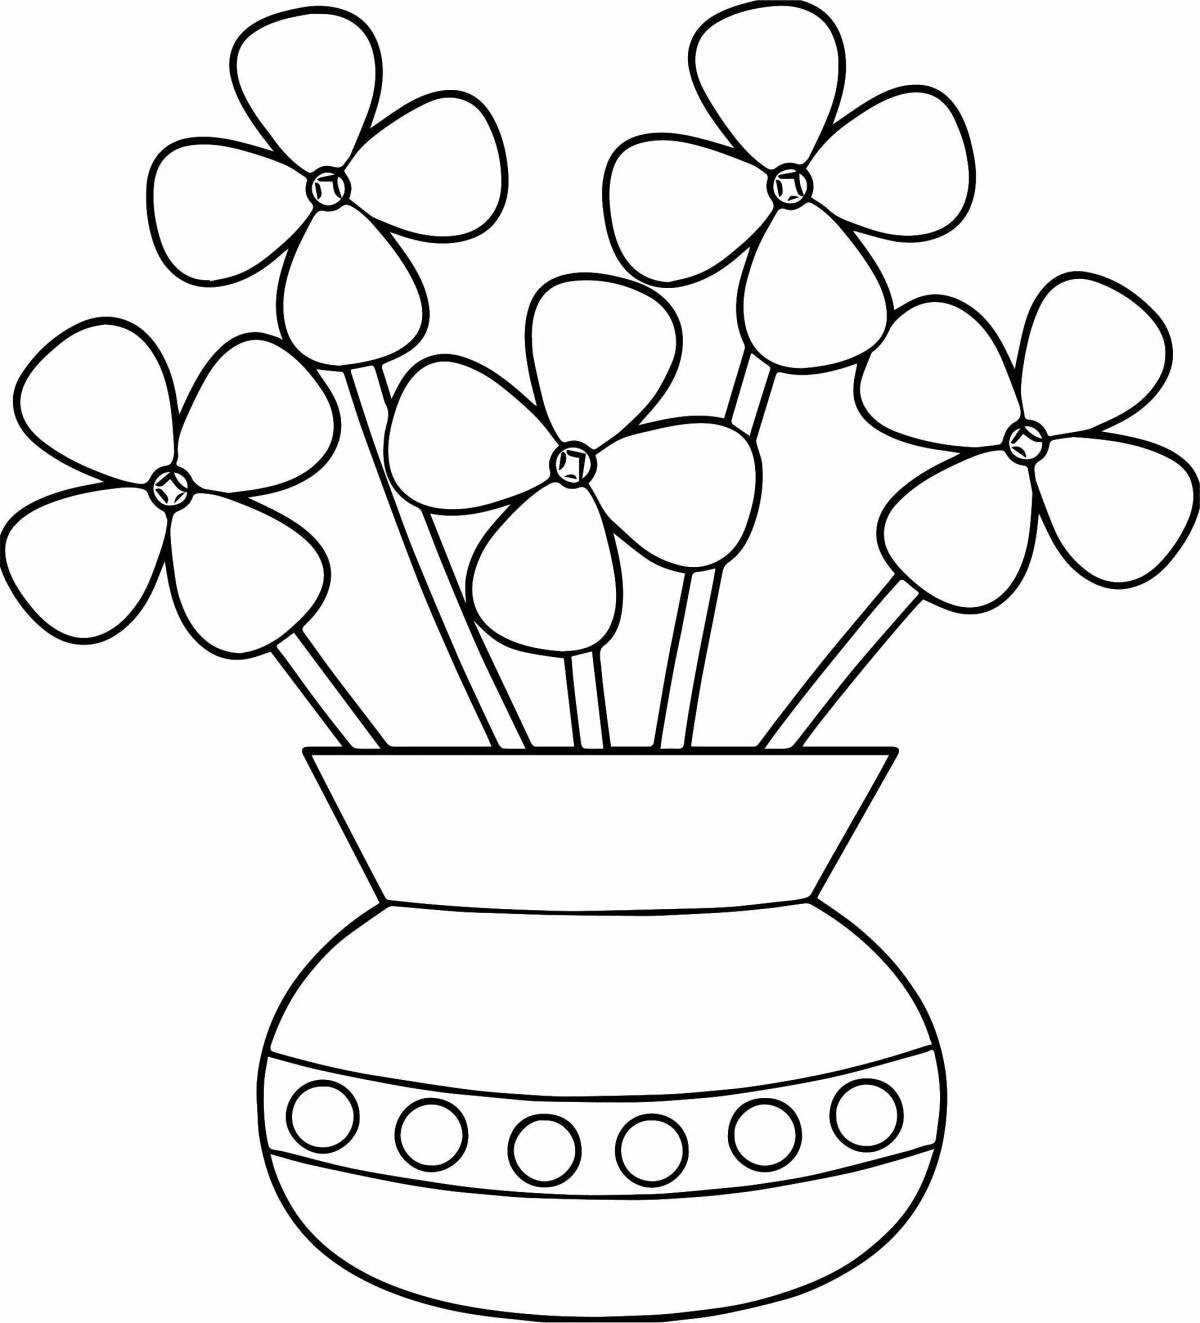 Coloring page live bouquet of flowers in a vase